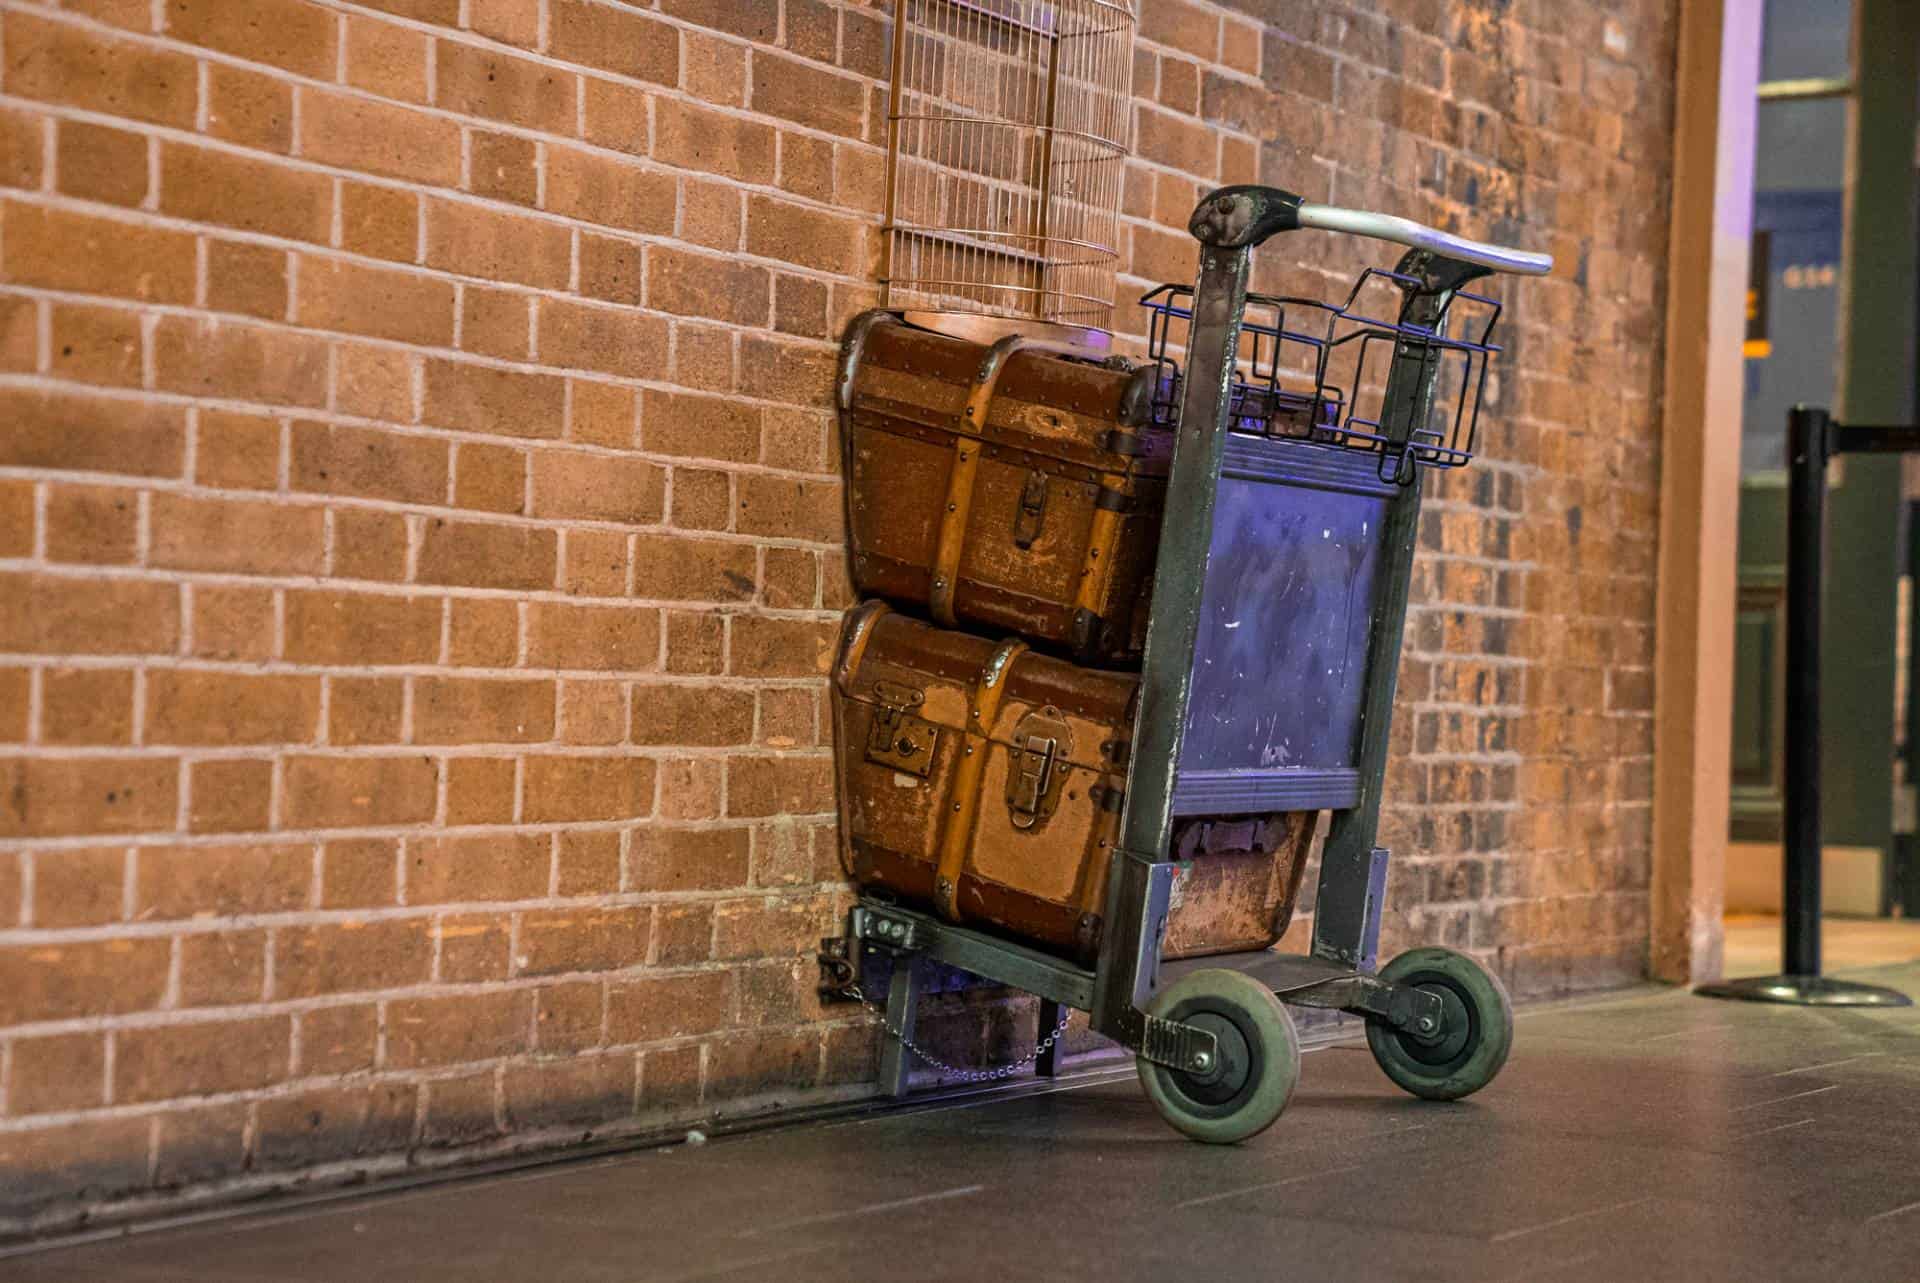 Platform 9 and 3/4 to Hogwarts Express at London's King's Cross Station